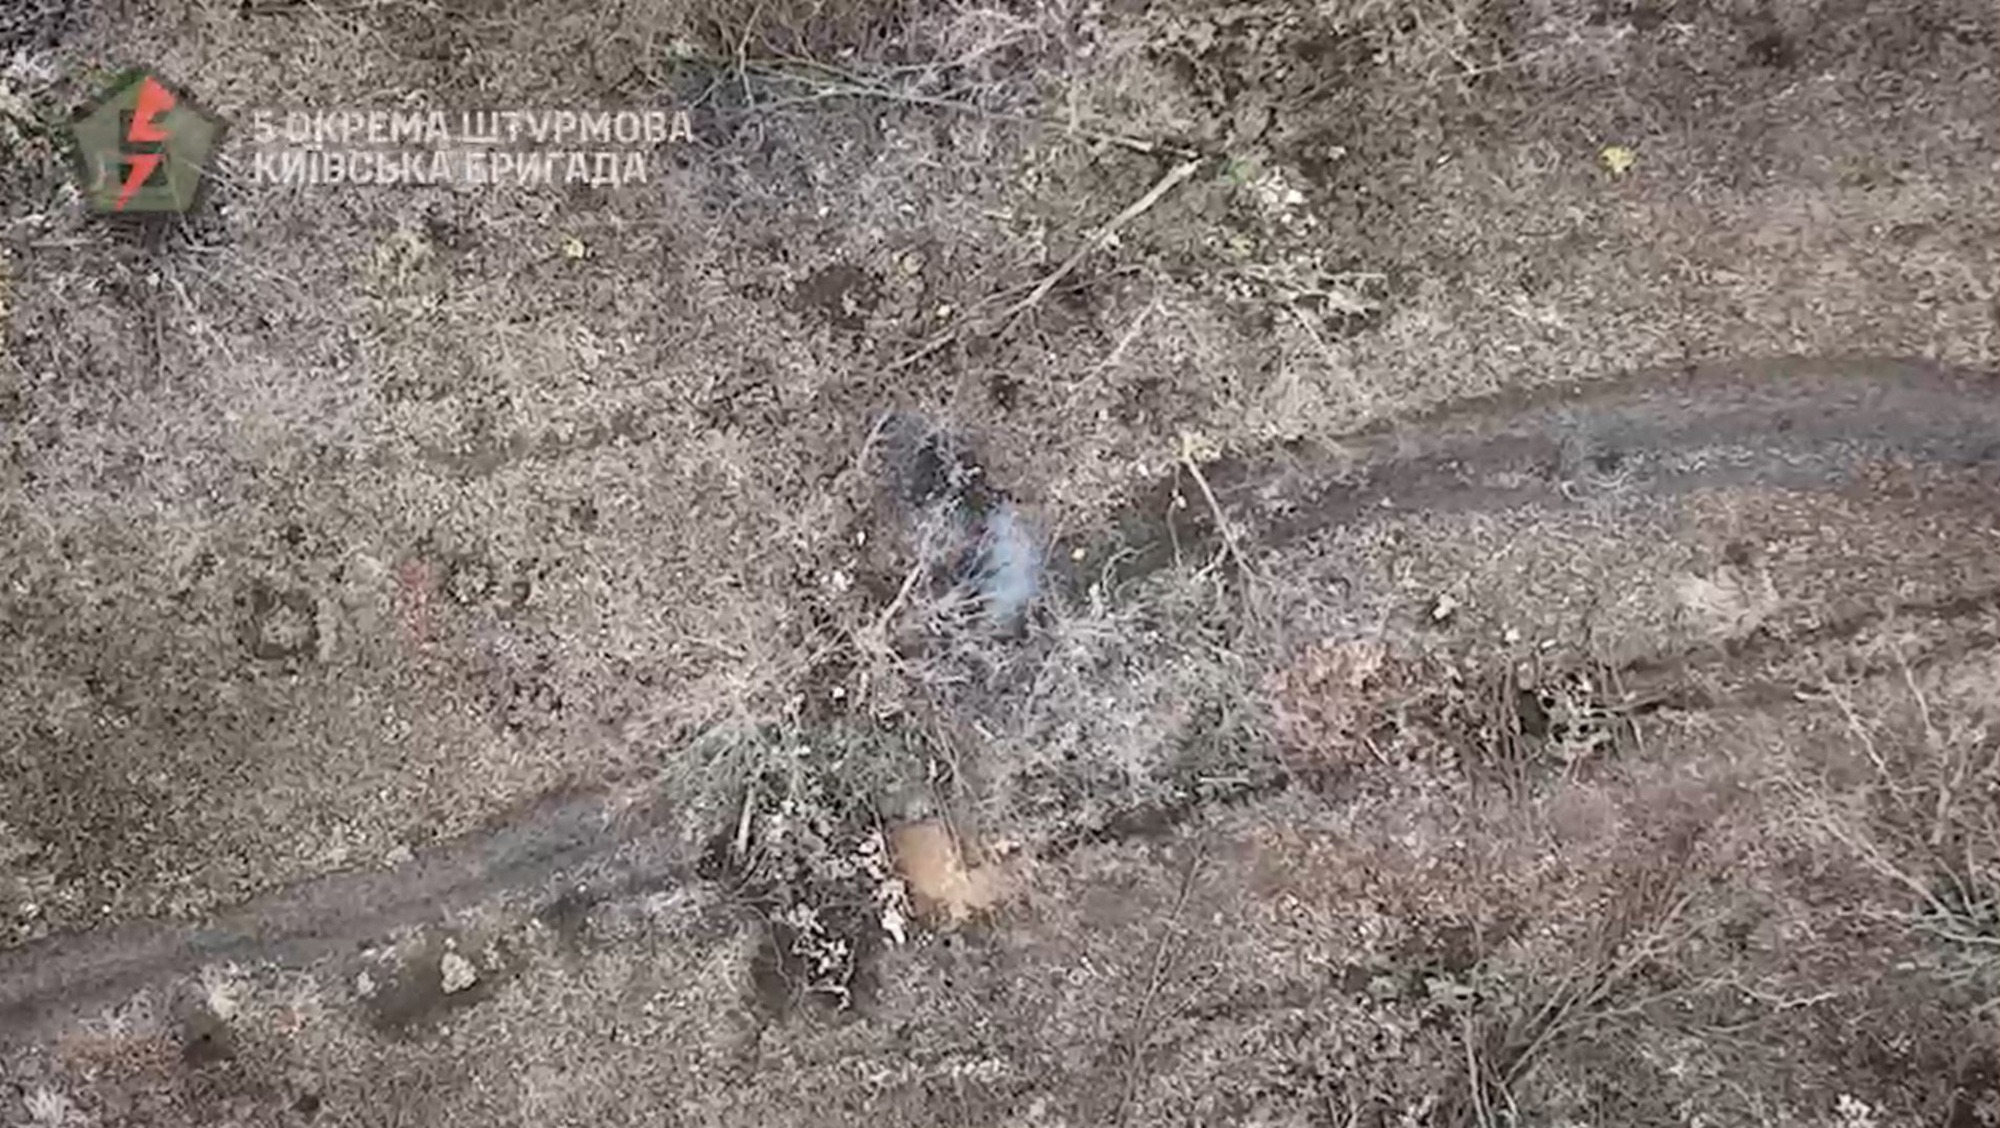 Ukrainian Special Forces Take Out Russian Soldiers On Frontlines